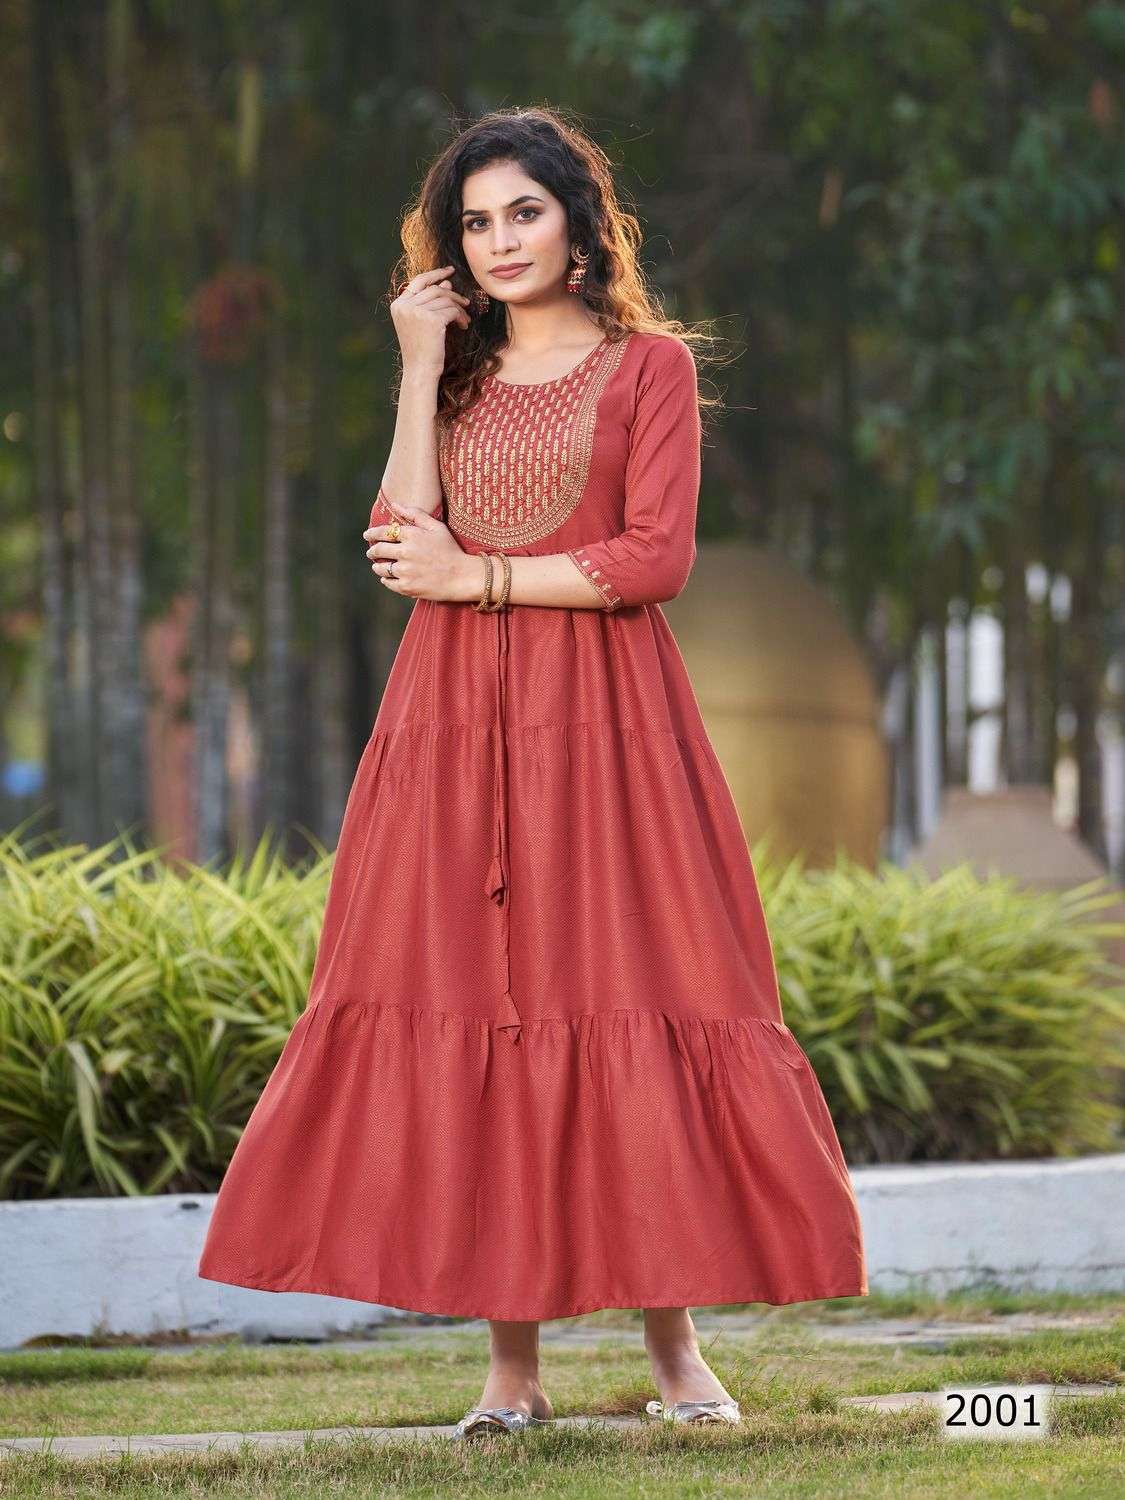 PETALS BY FOUR BUTTONS VISCOSE RICH LOOK GOWN STYLE KURTI WHOLESELLER -  Reewaz International | Wholesaler & Exporter of indian ethnic wear catalogs.